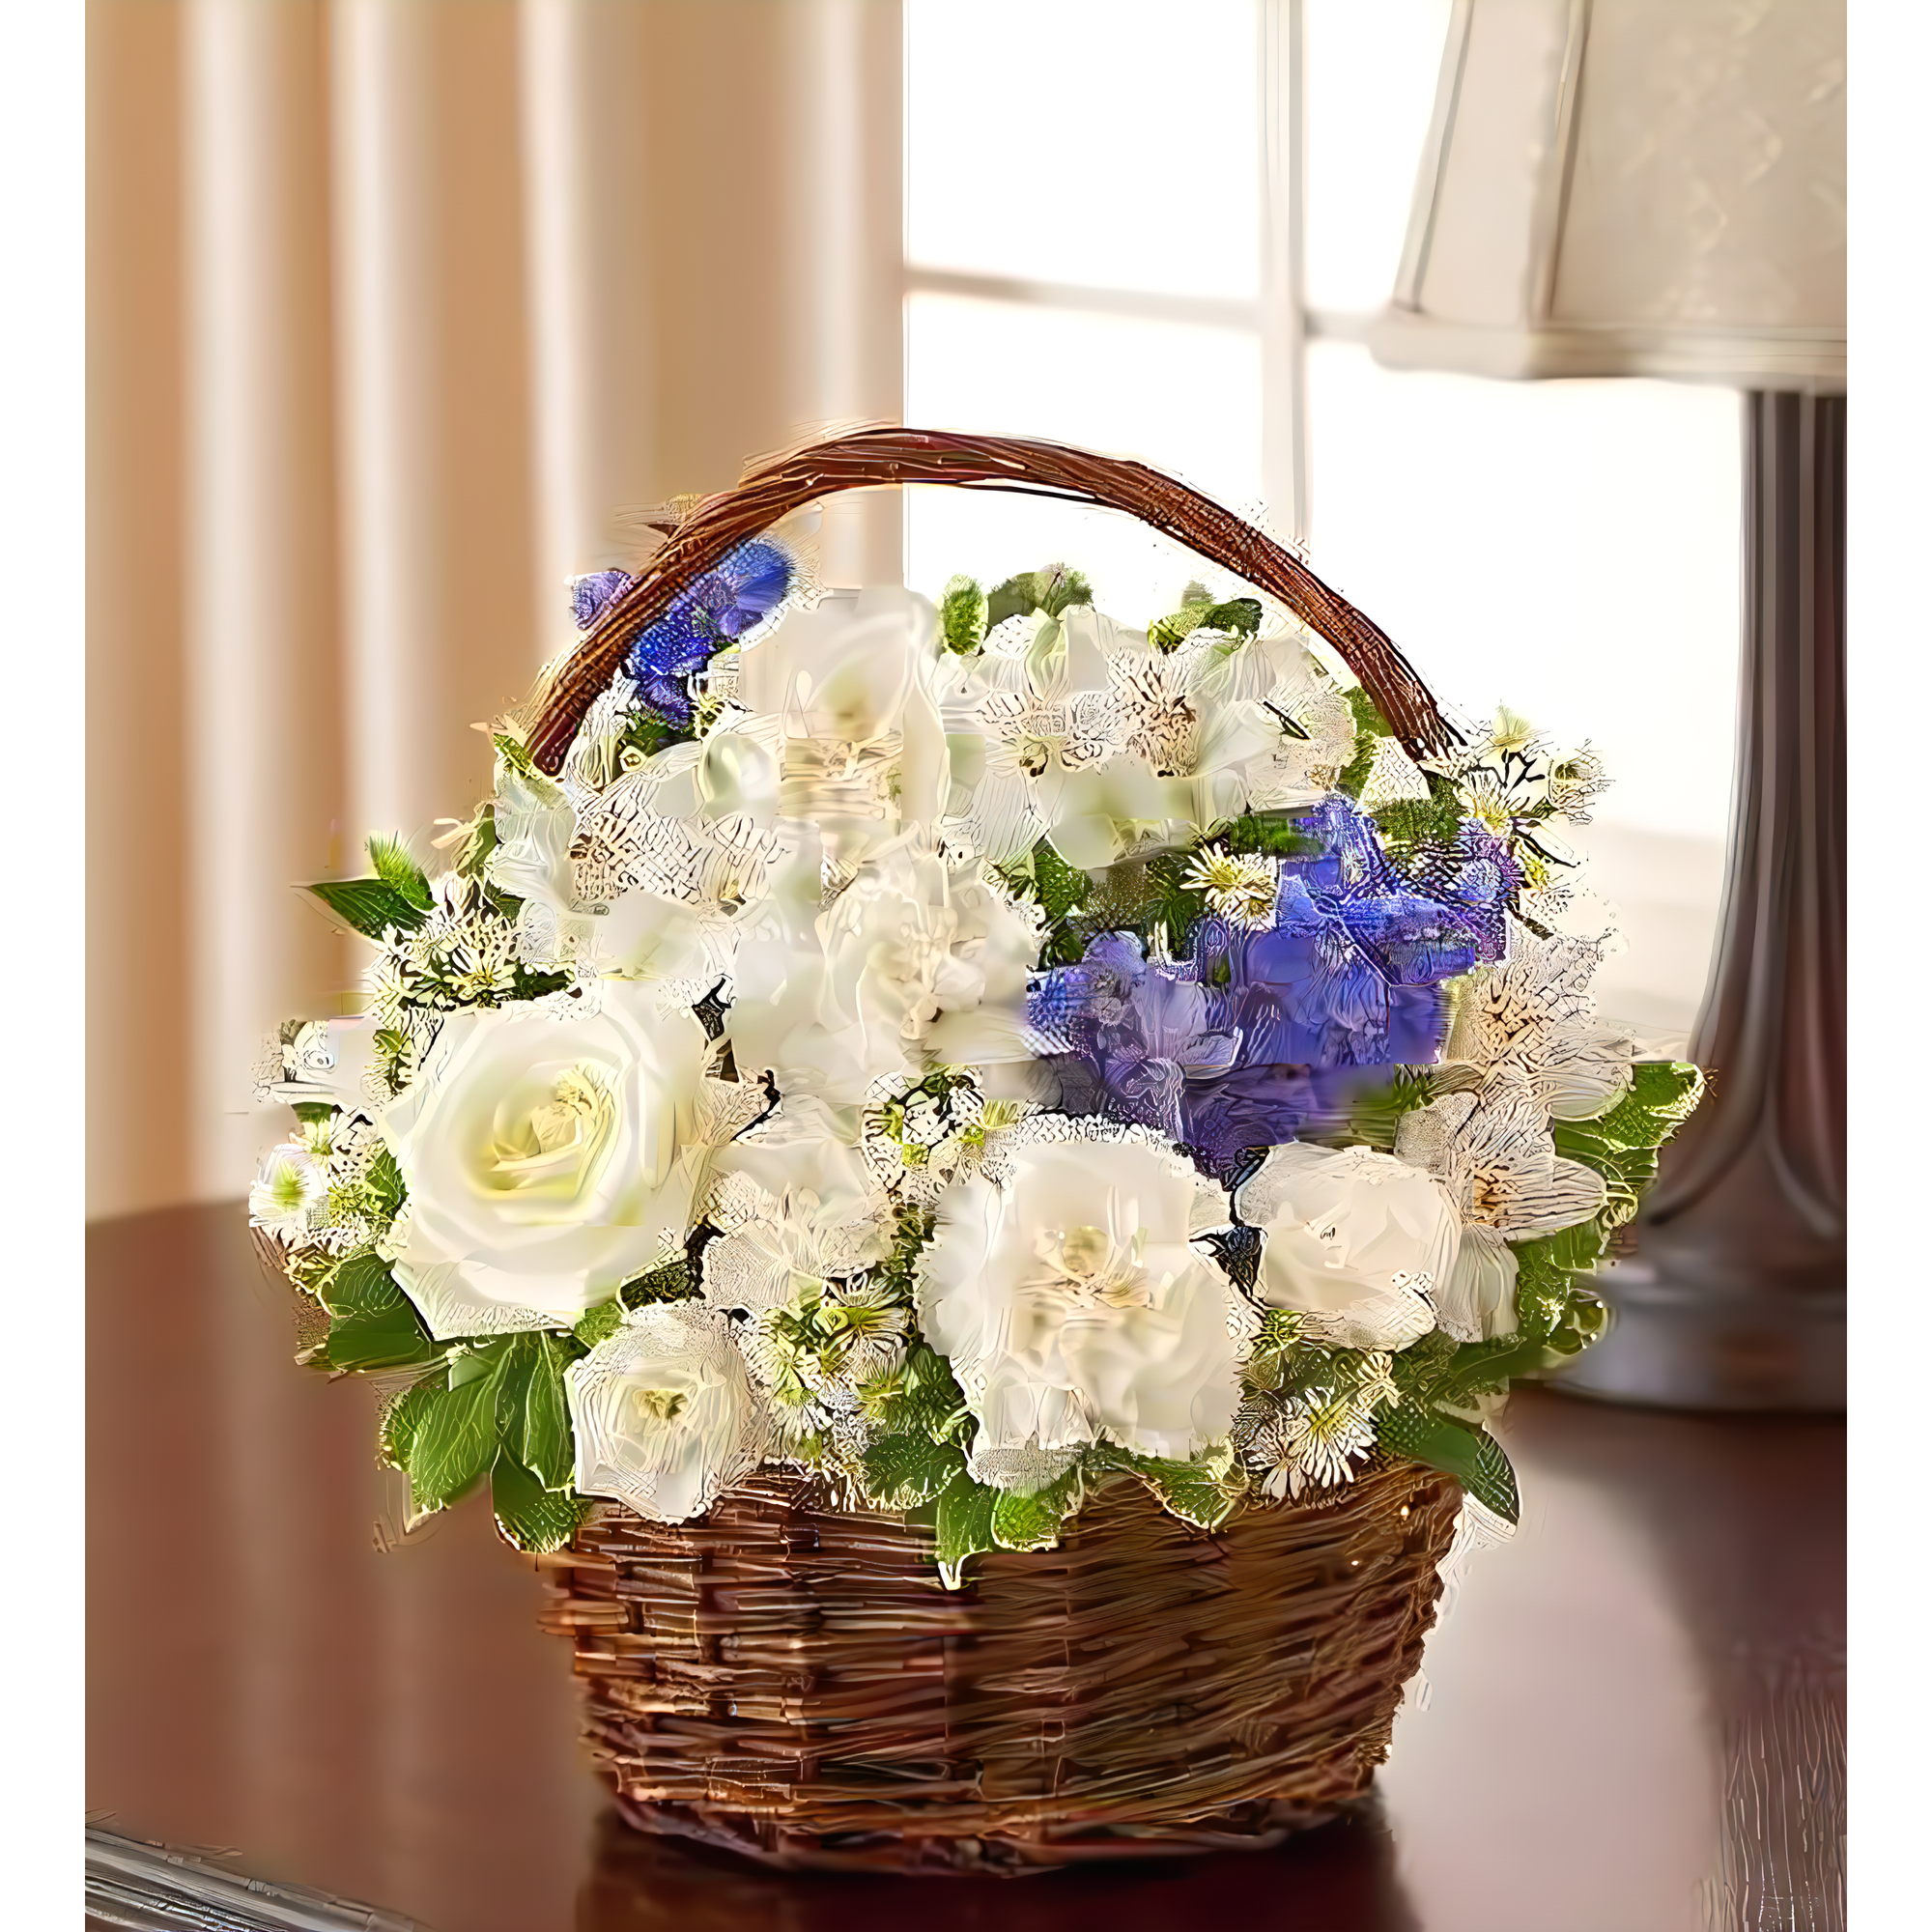 Manhattan Flower Delivery - Peace, Prayers & Blessings - Blue and White - Fresh Cut Flowers